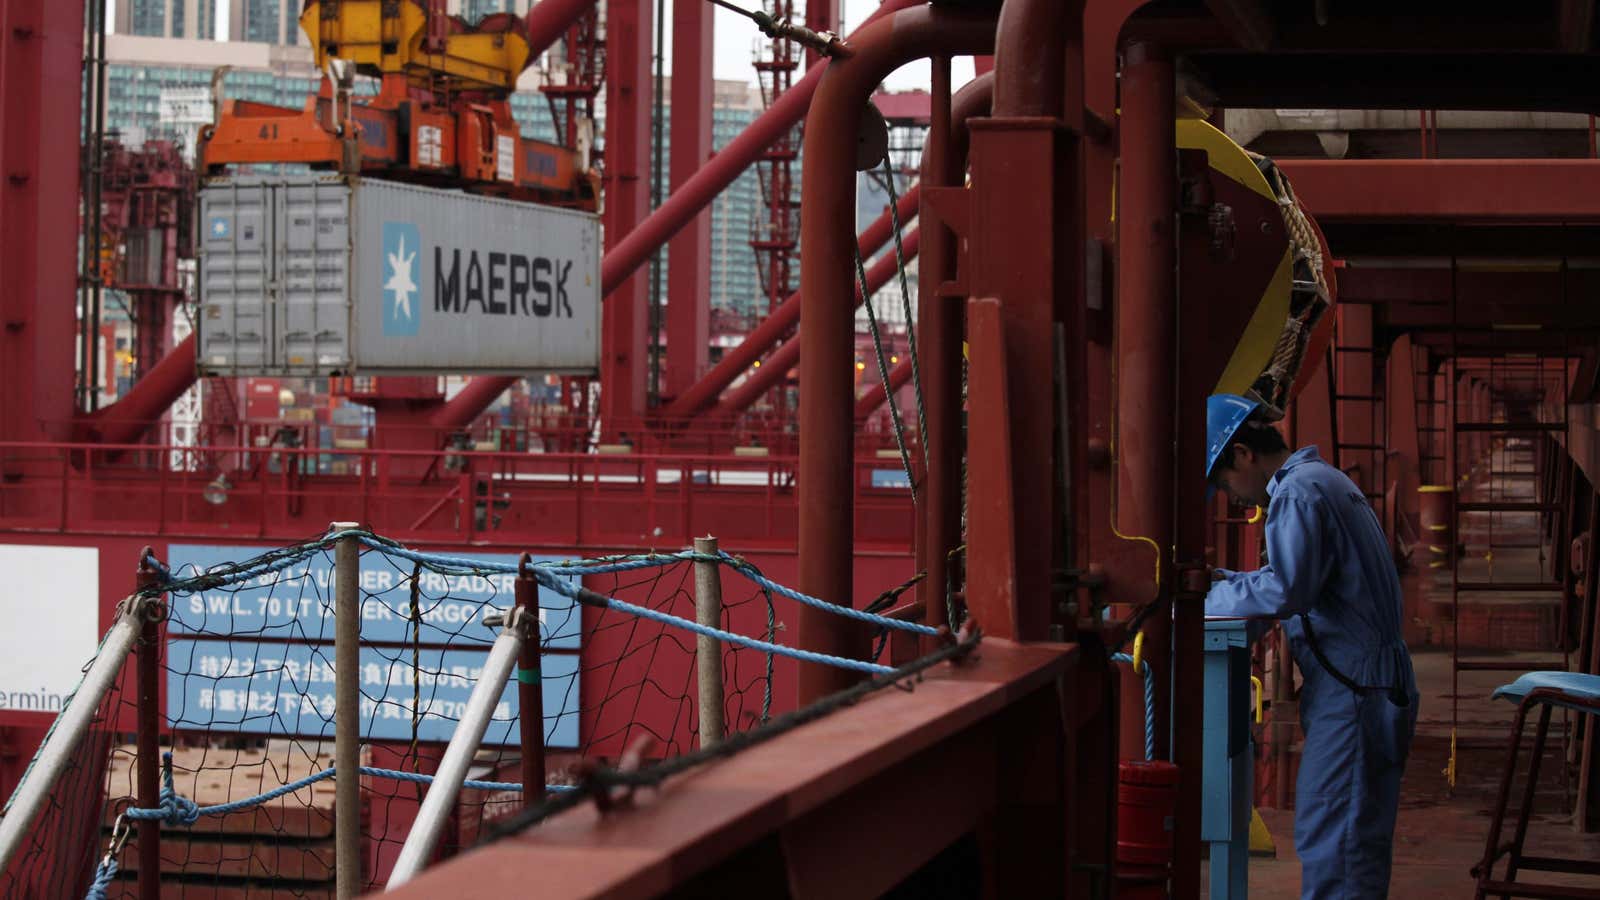 A crew member works as cargo is unloaded from Emma Maersk, one of the world’s largest containers.